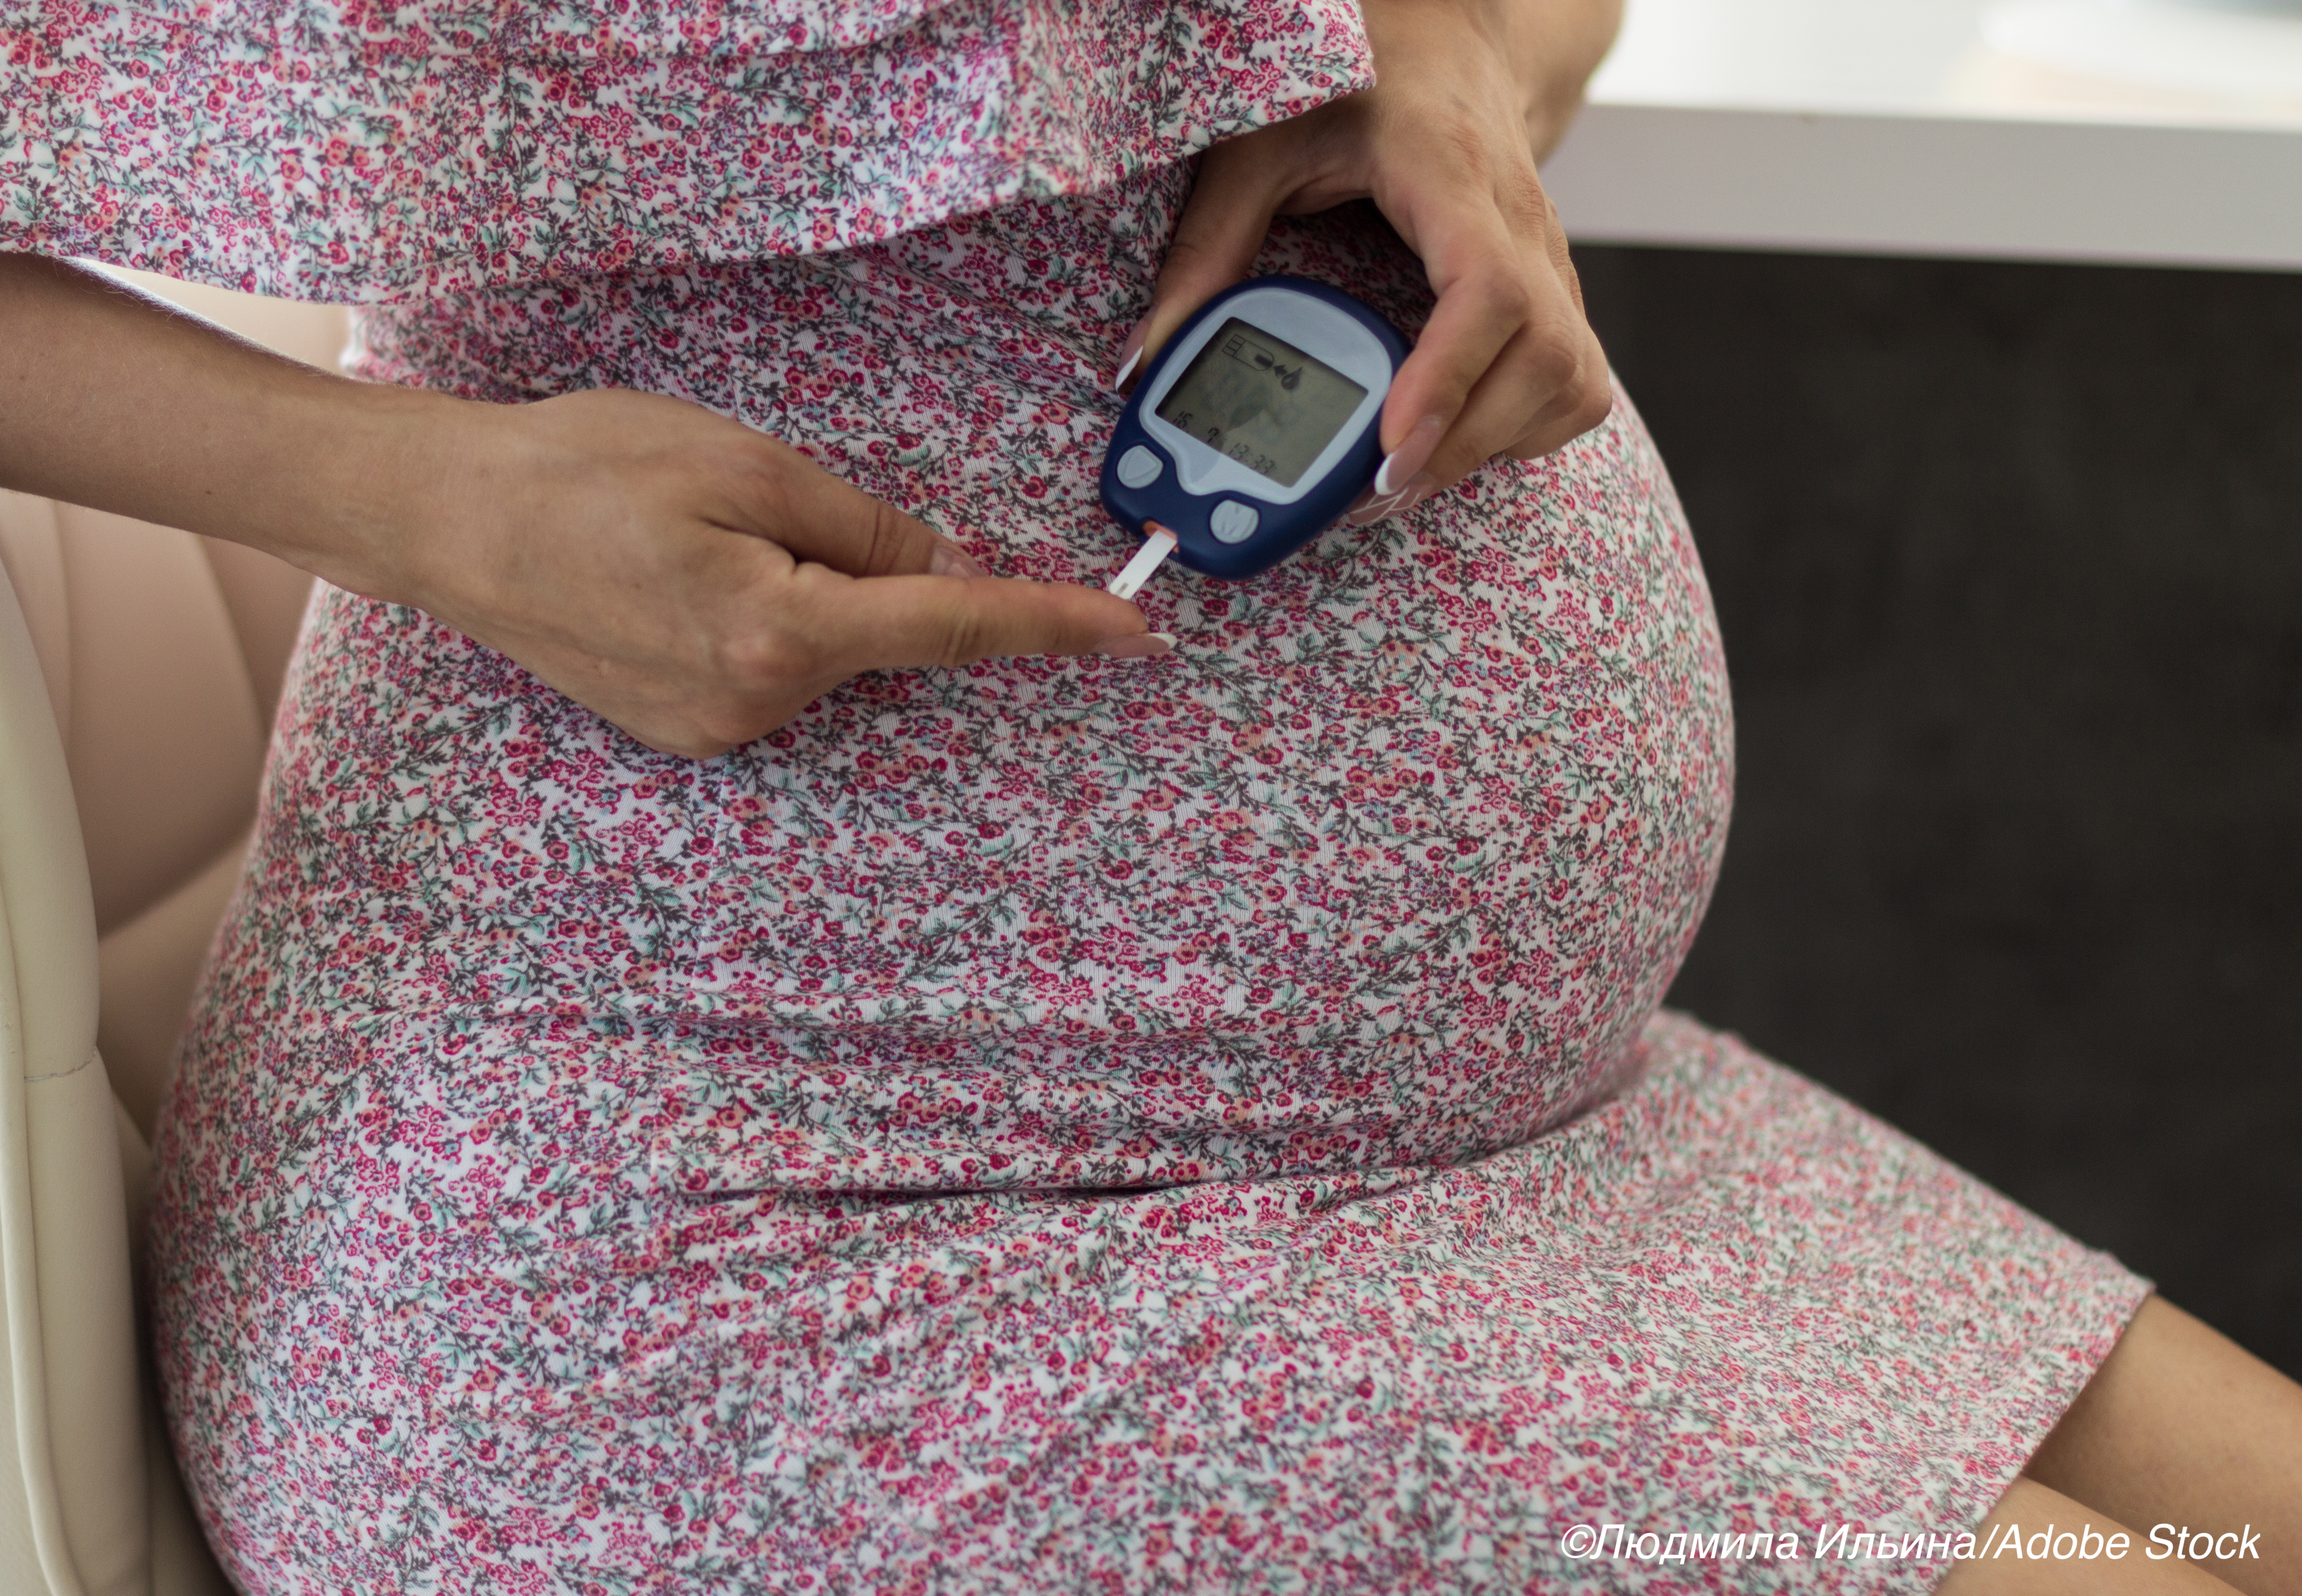 One-Step vs Two-Step Screening: Which is Better for Gestational Diabetes?